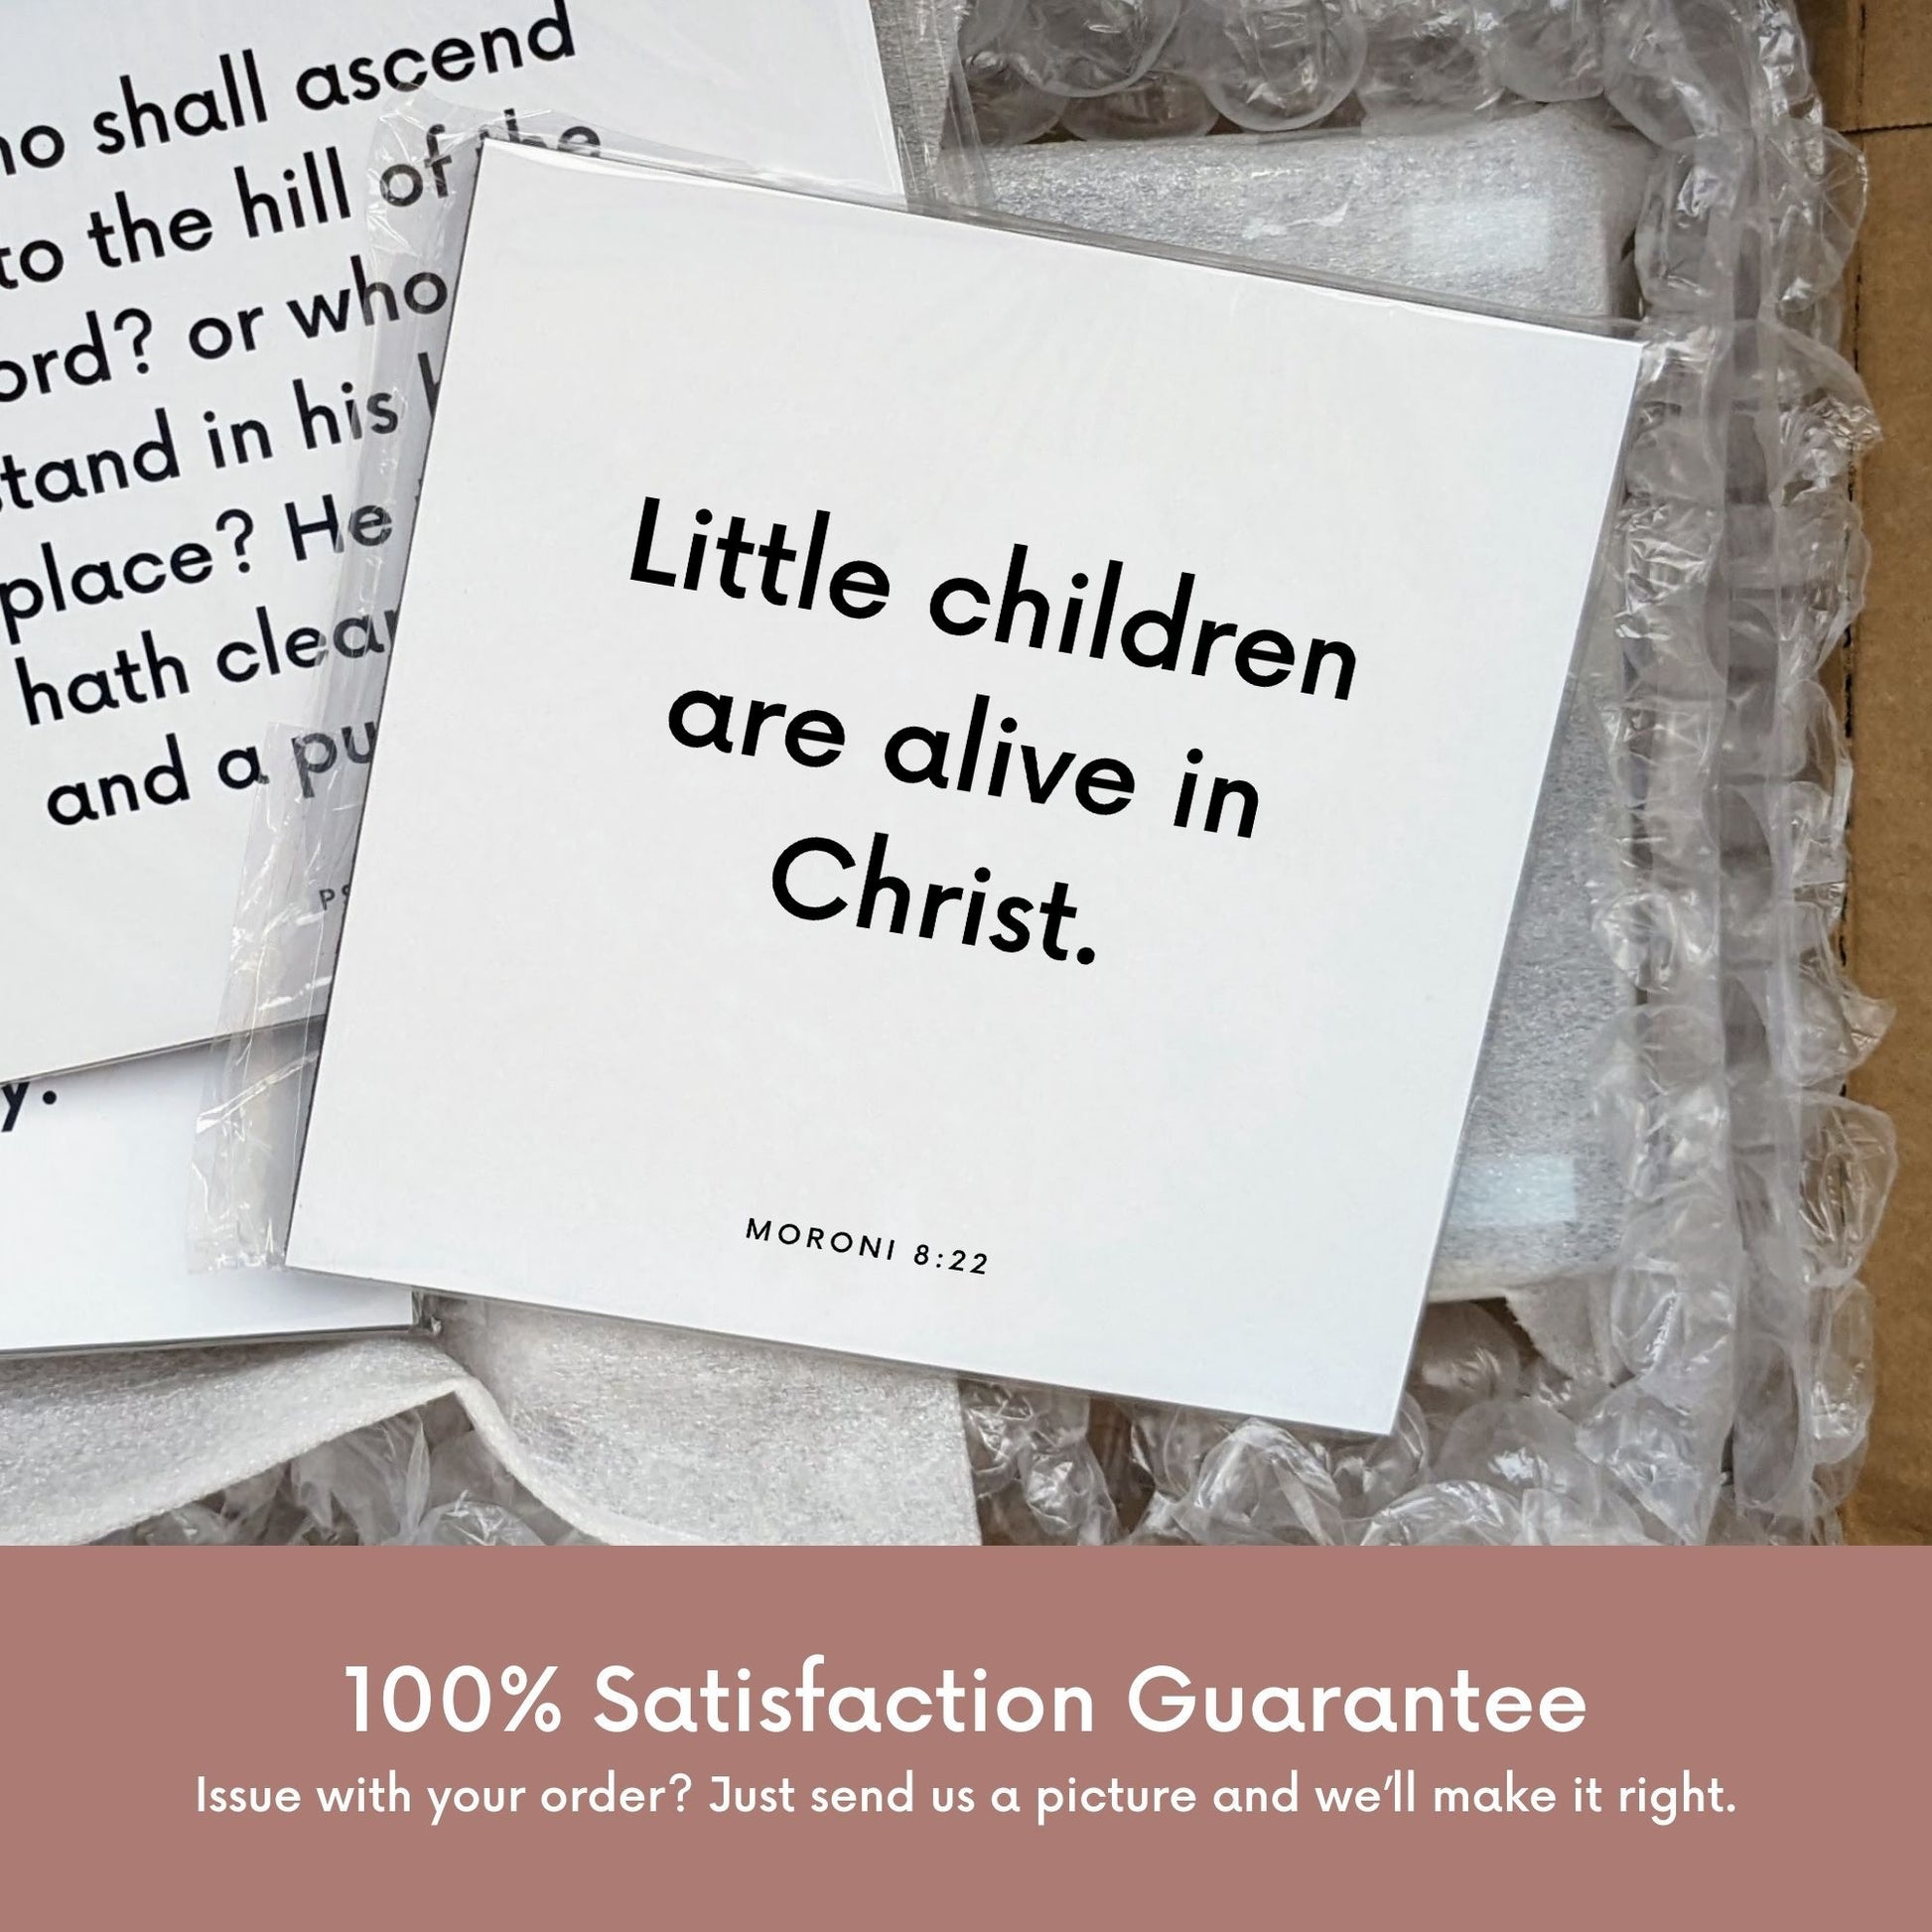 Shipping materials for scripture tile of Moroni 8:22 - "Little children are alive in Christ"